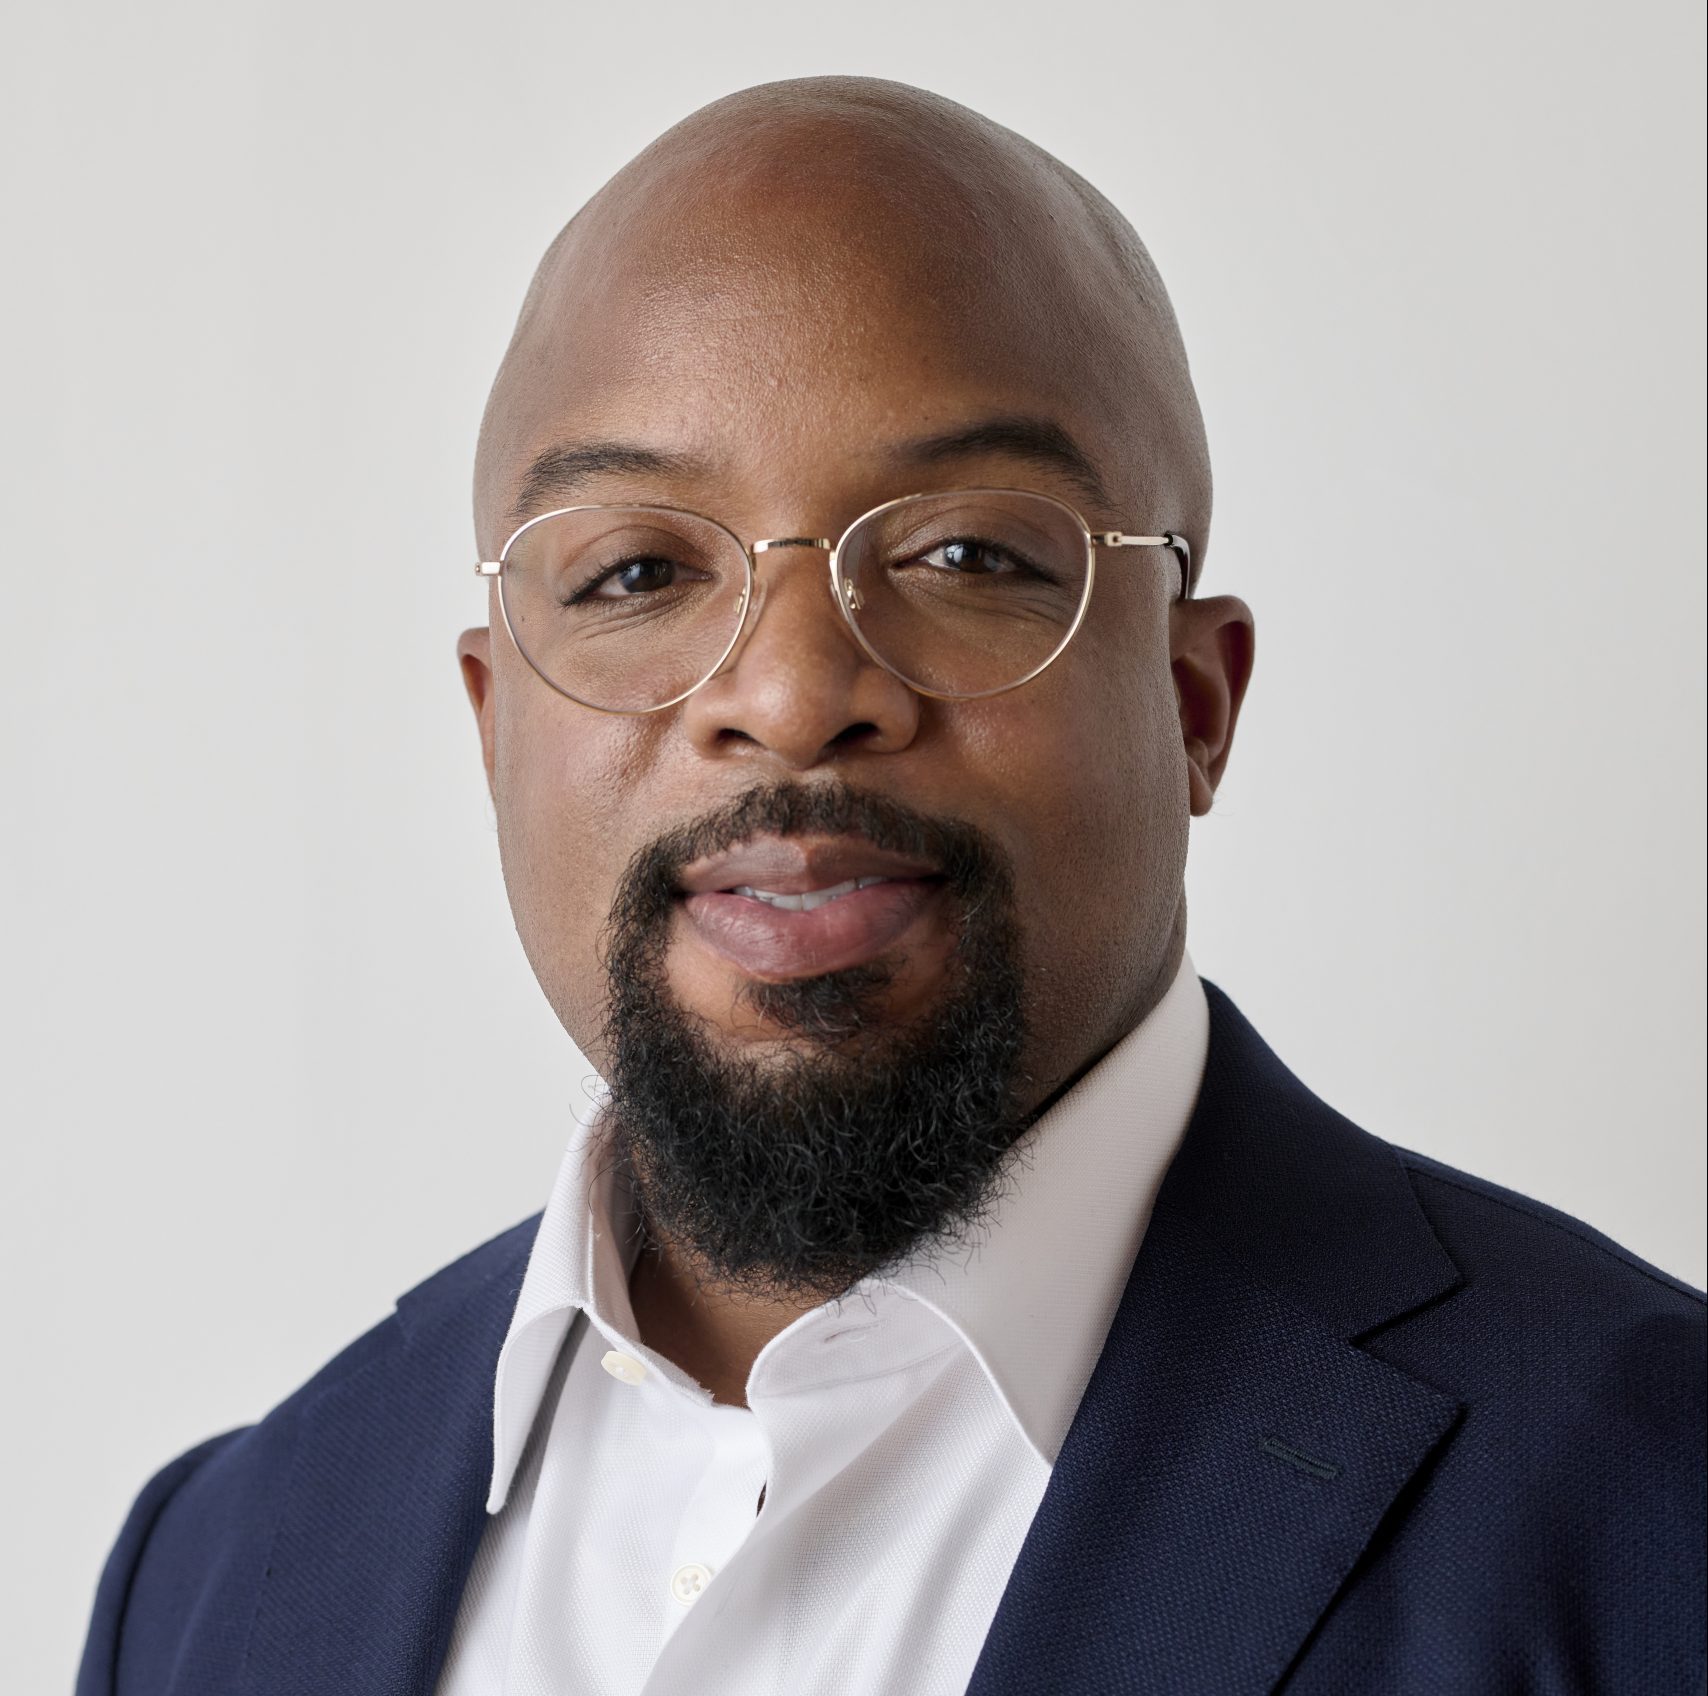 Kinly app founder motivated to balance the financial scales for Black America